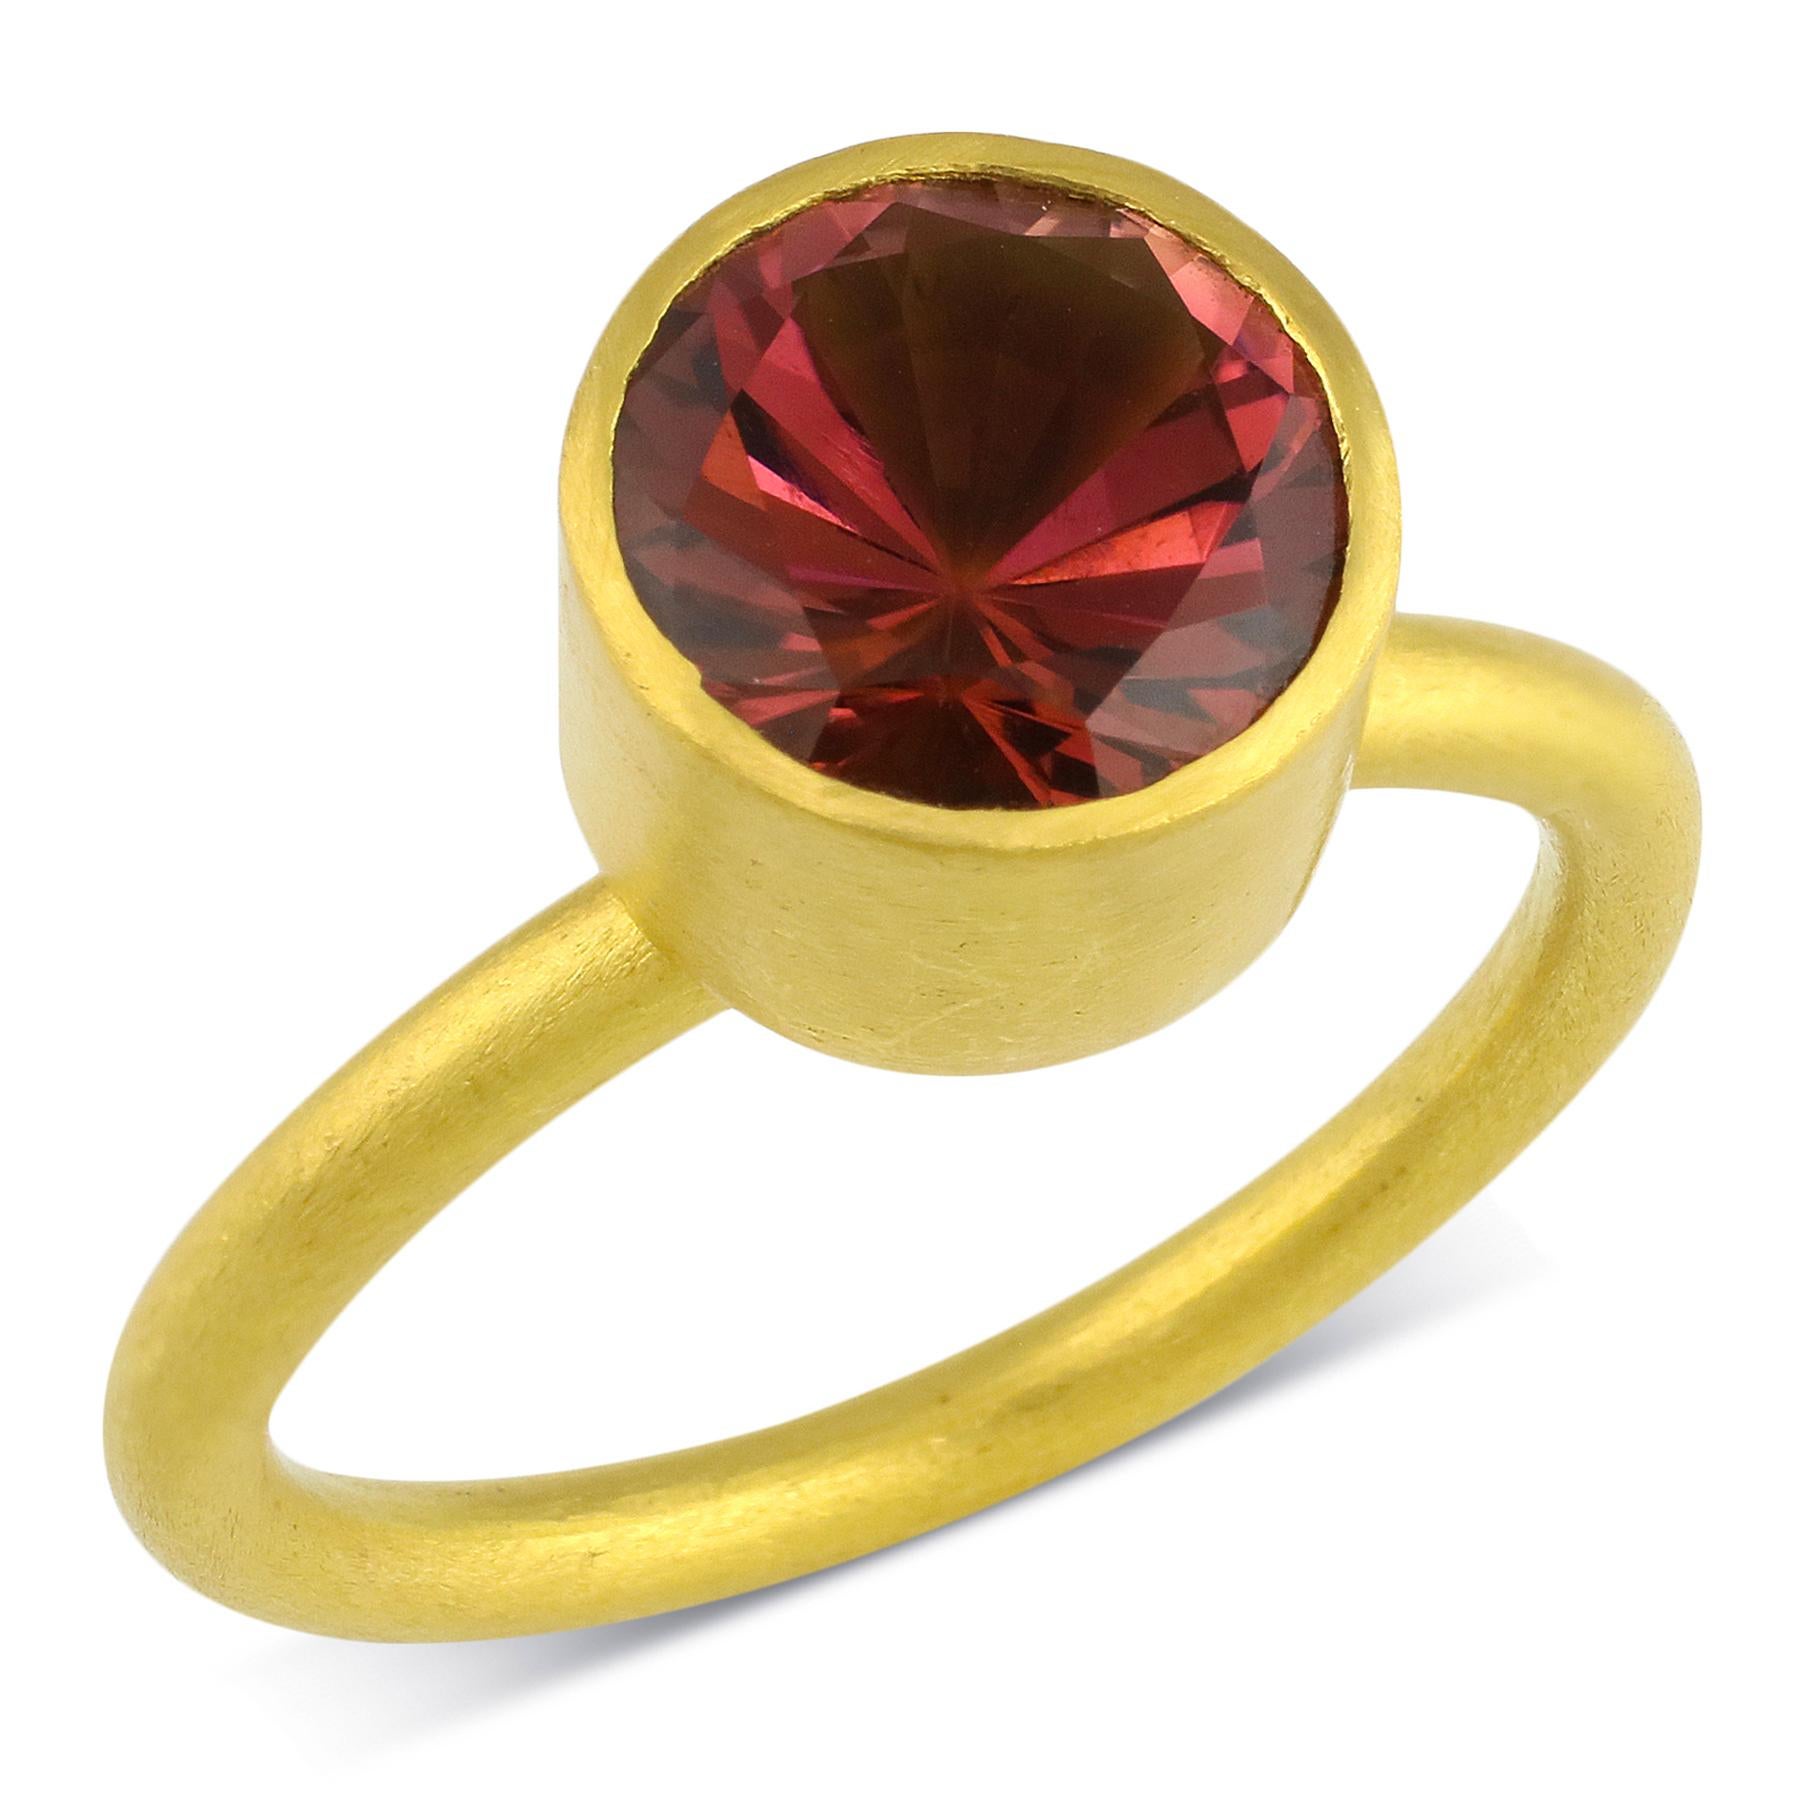 PHILIPPE-SPENCER -   1.85 Ct Dark Pink Bi-Color Tourmaline wrapped in 22K Gold Bezel with Solid Round 20K Gold Ring. Brushed Matte Finish. Size 6 1/2, and is in-stock and ready to ship. Our apologies in advance, this One-Of-A-Kind Solitaire is not